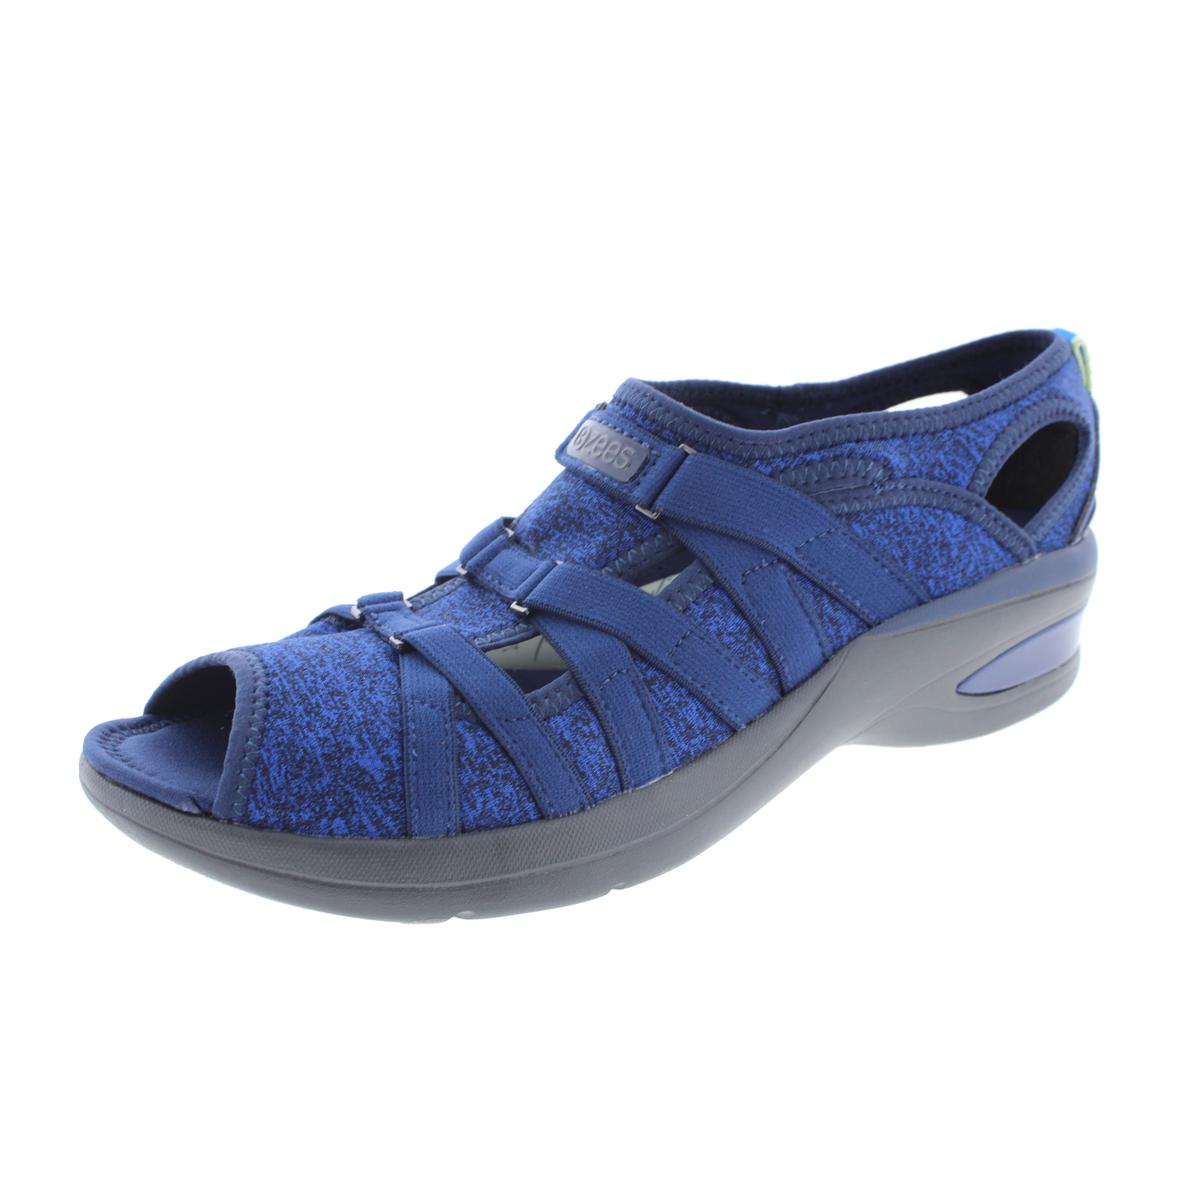 Bzees 7571 Womens Reveal Heathered Open Toe Casual Walking Shoes BHFO ...